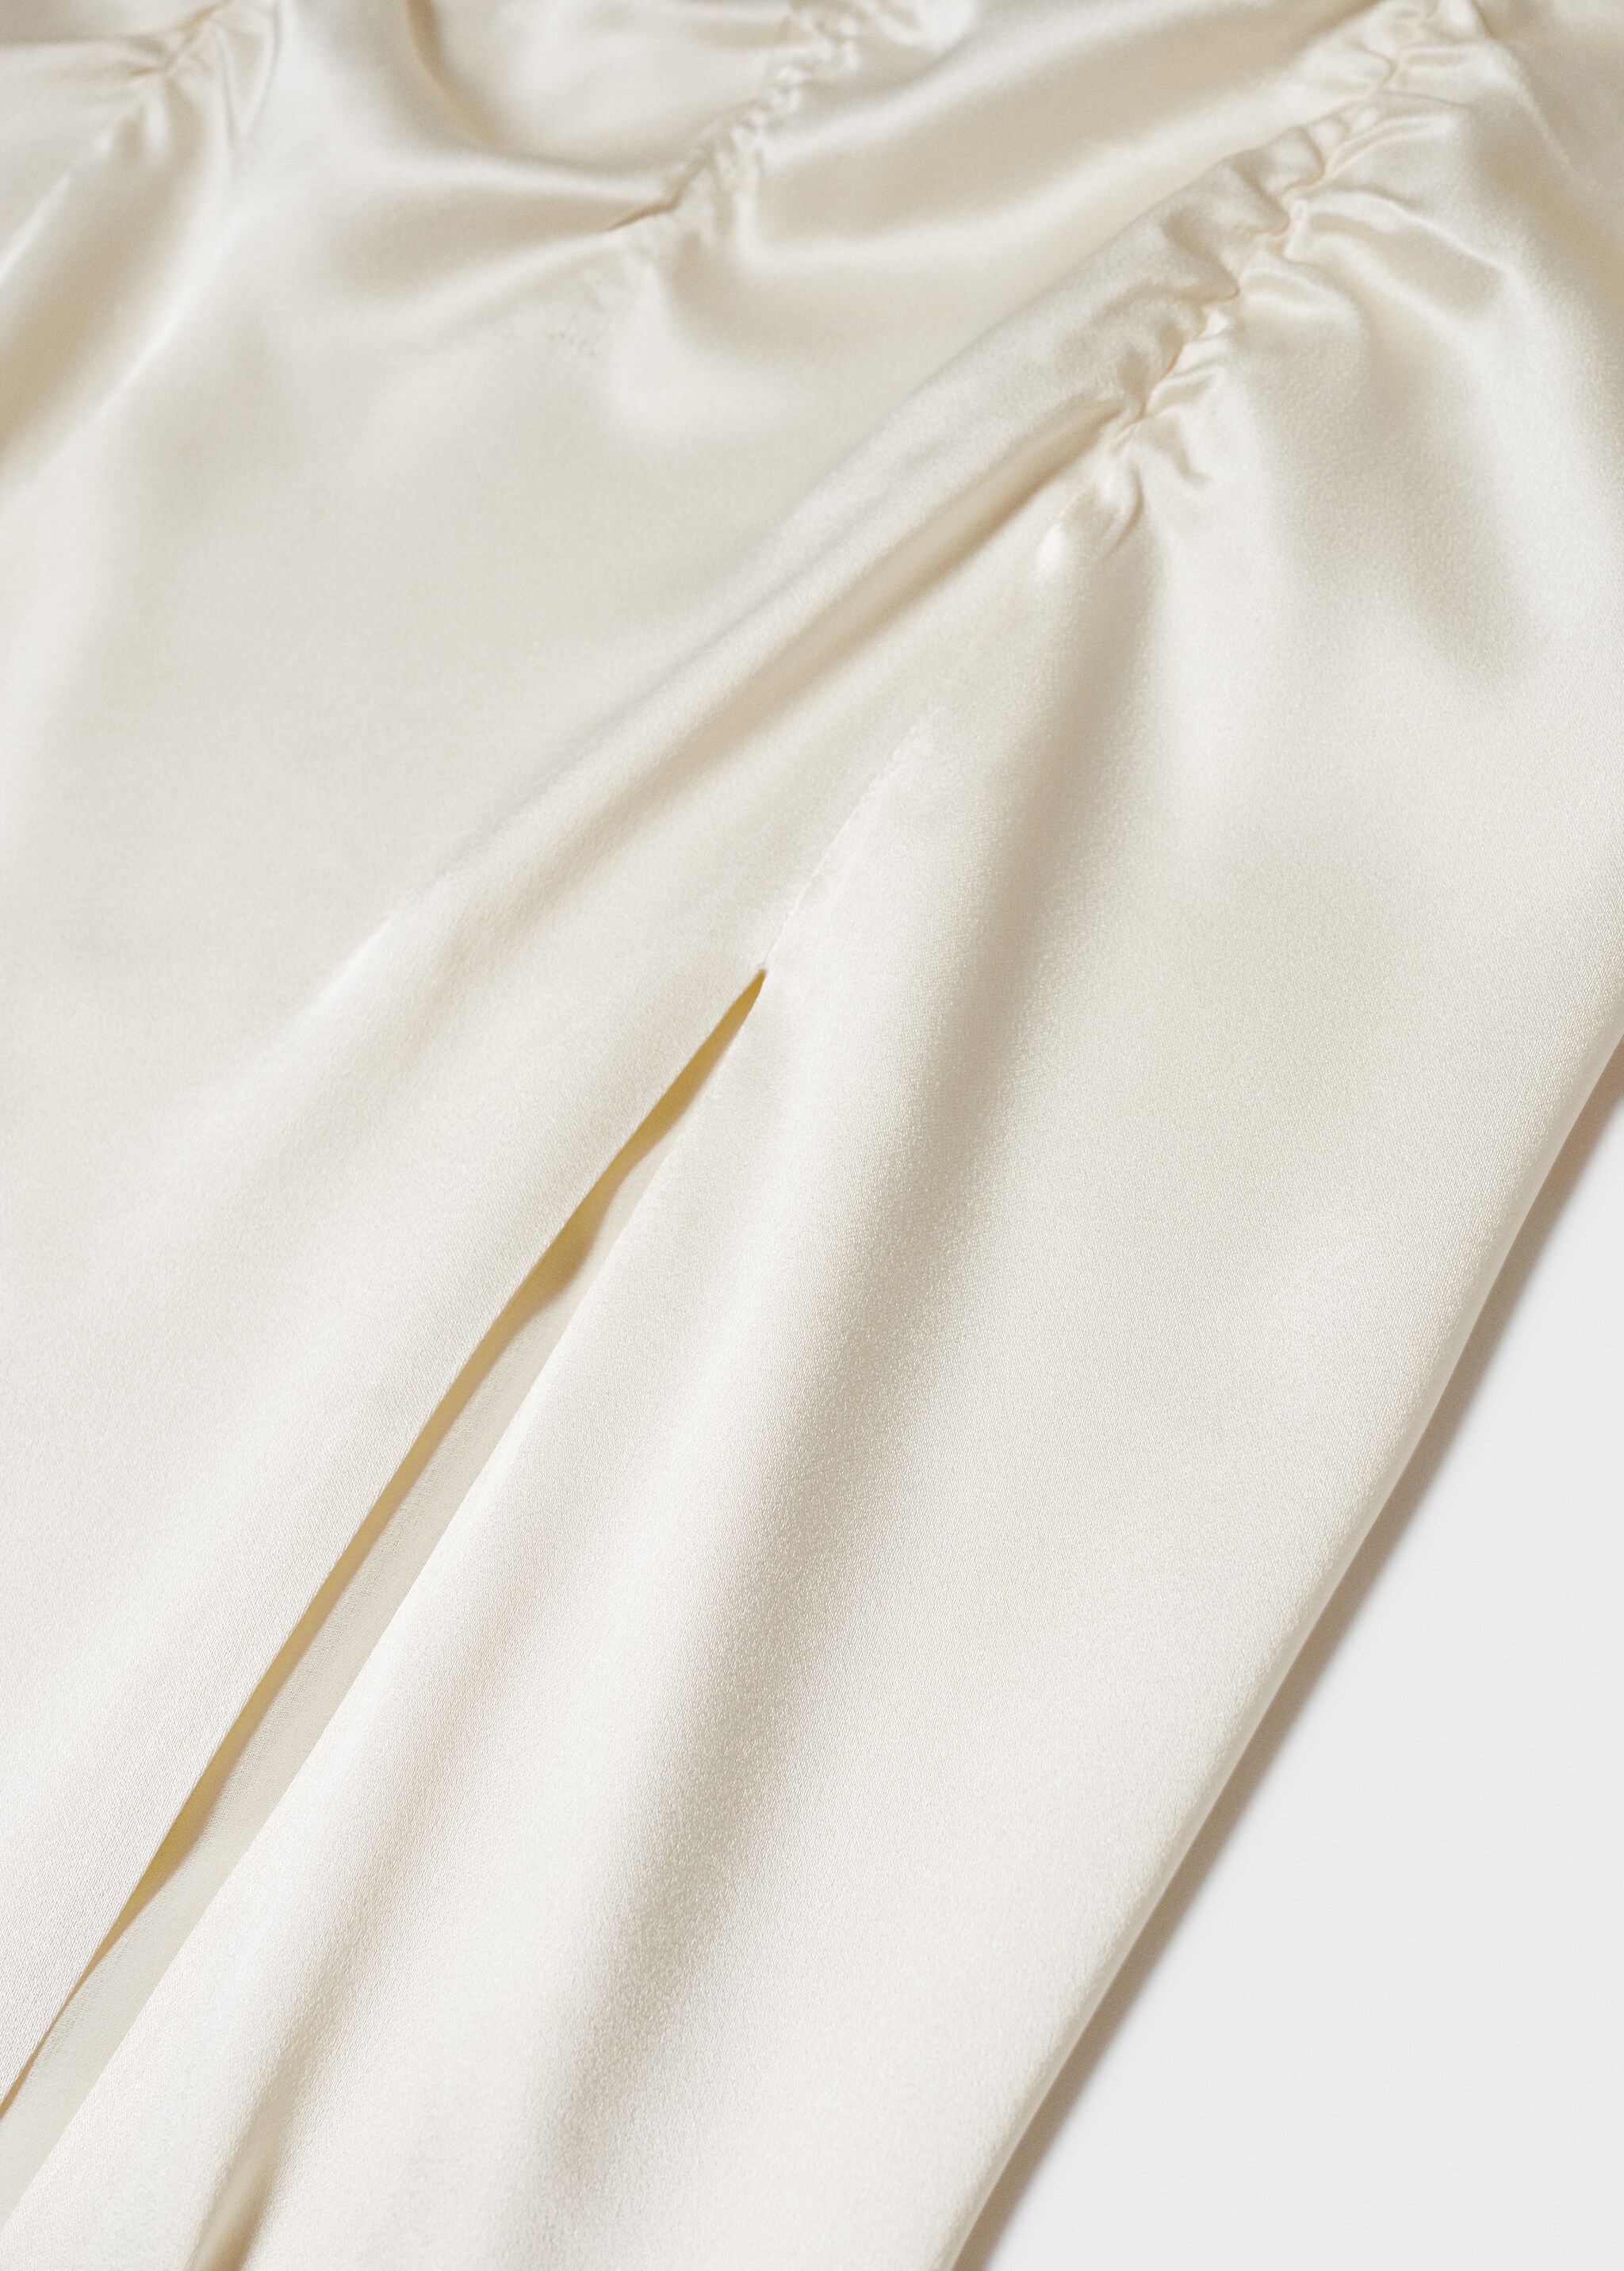 Satin draped dress - Details of the article 8